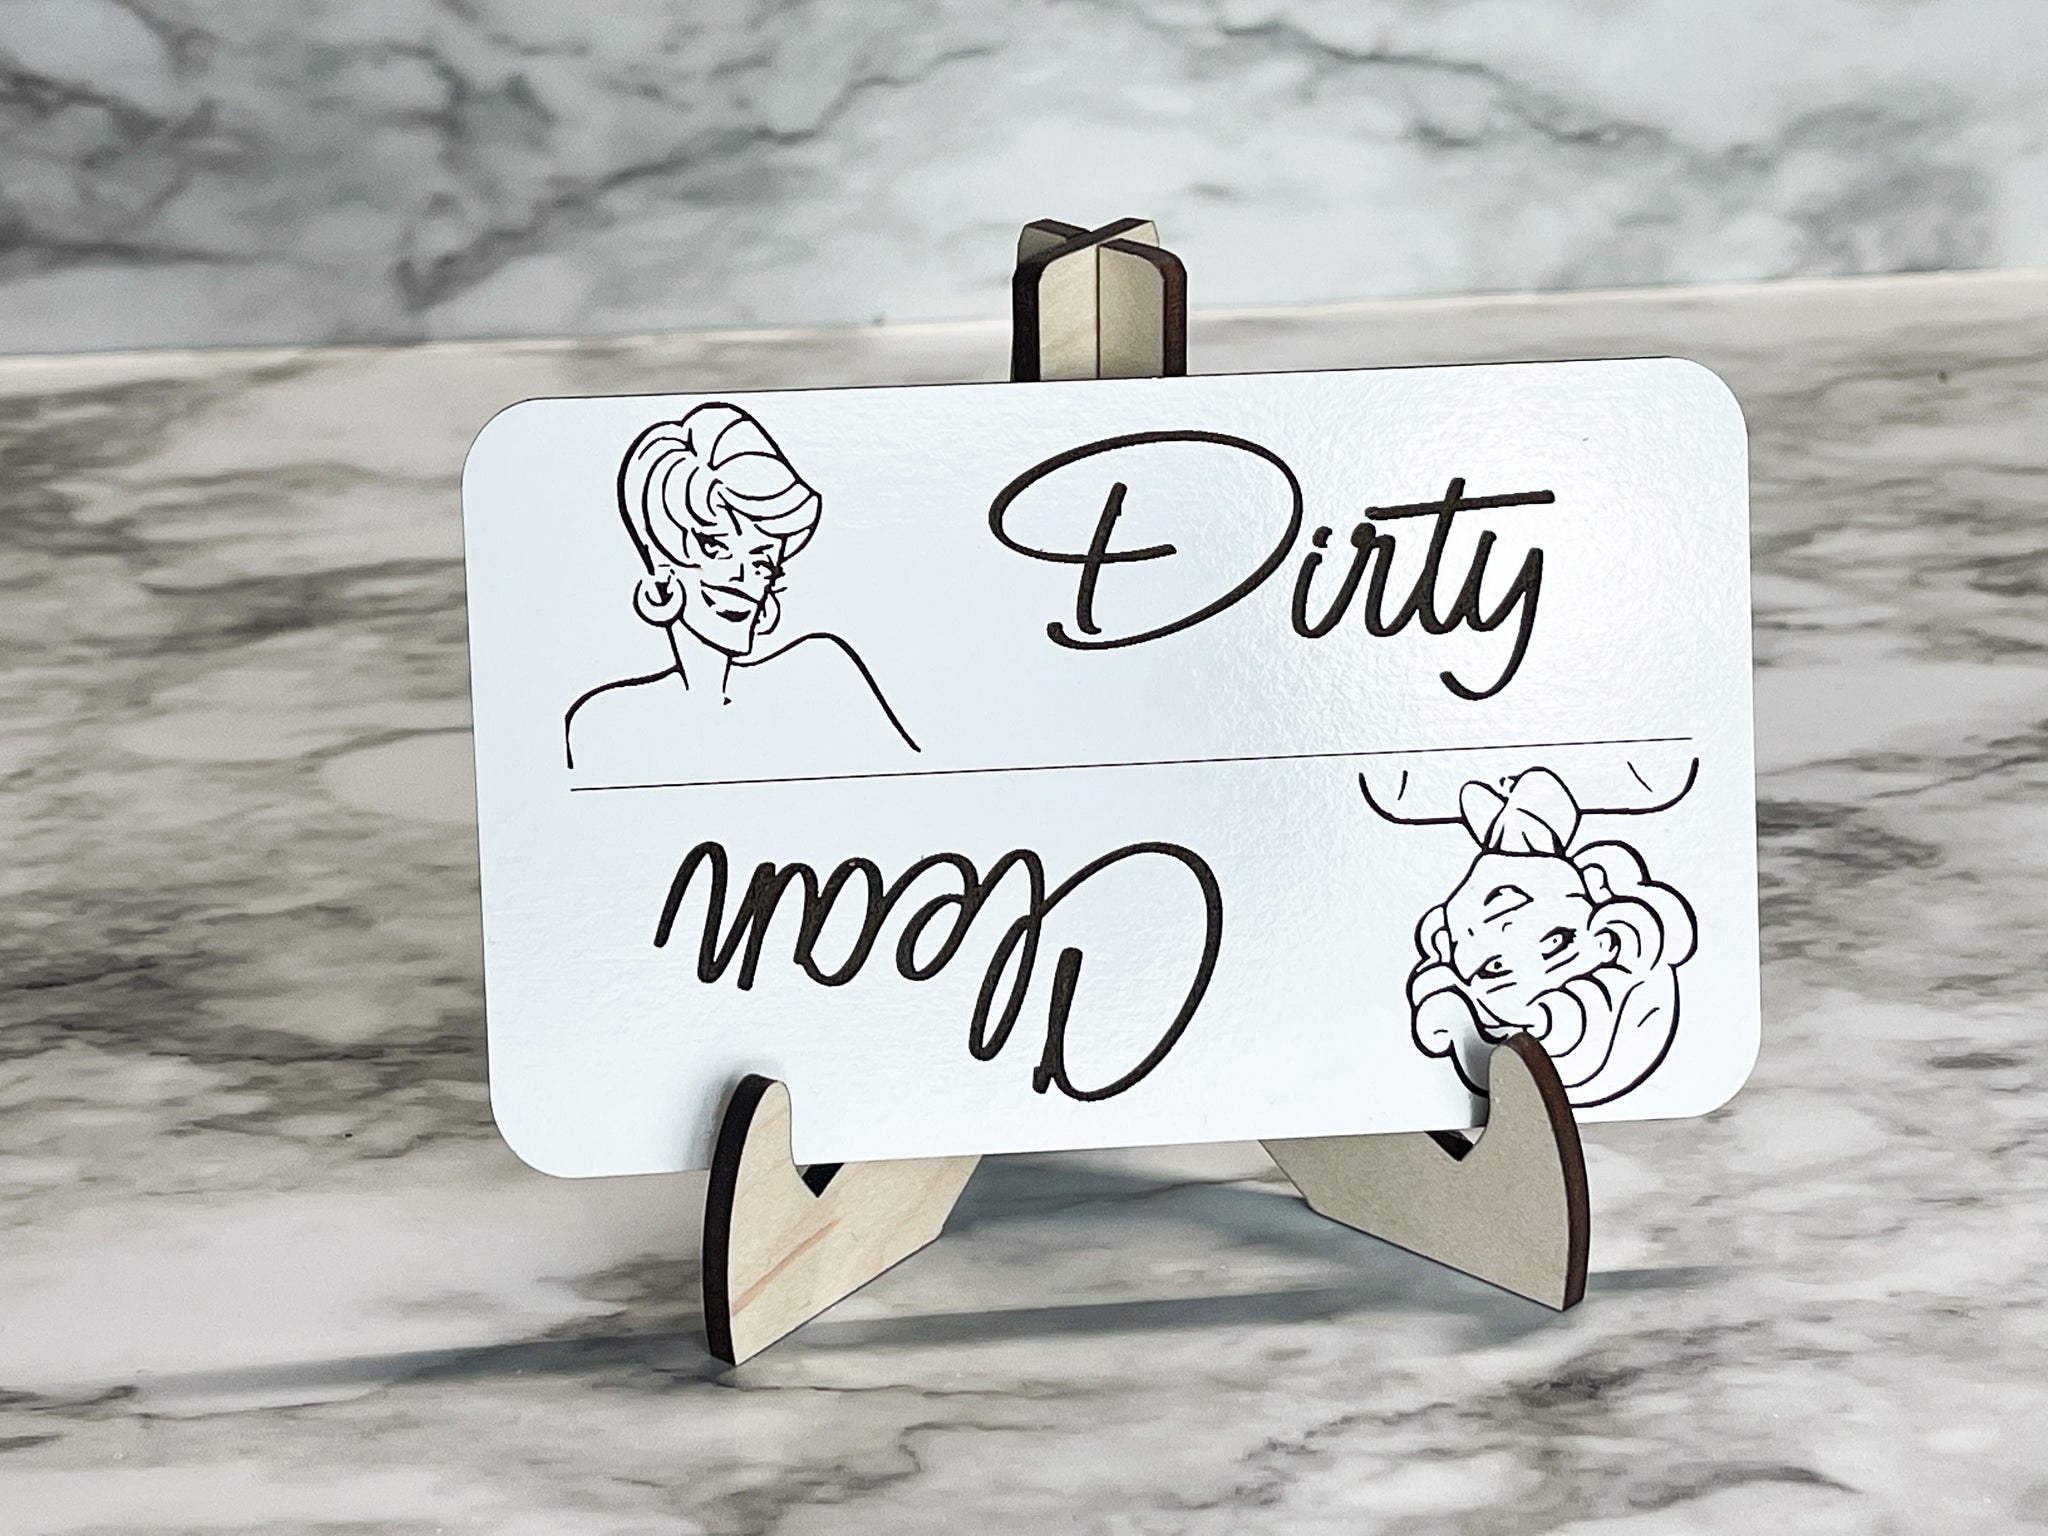 Dirty/Clean Dishwasher Magnet - Rose and Blanche - The Golden Girls